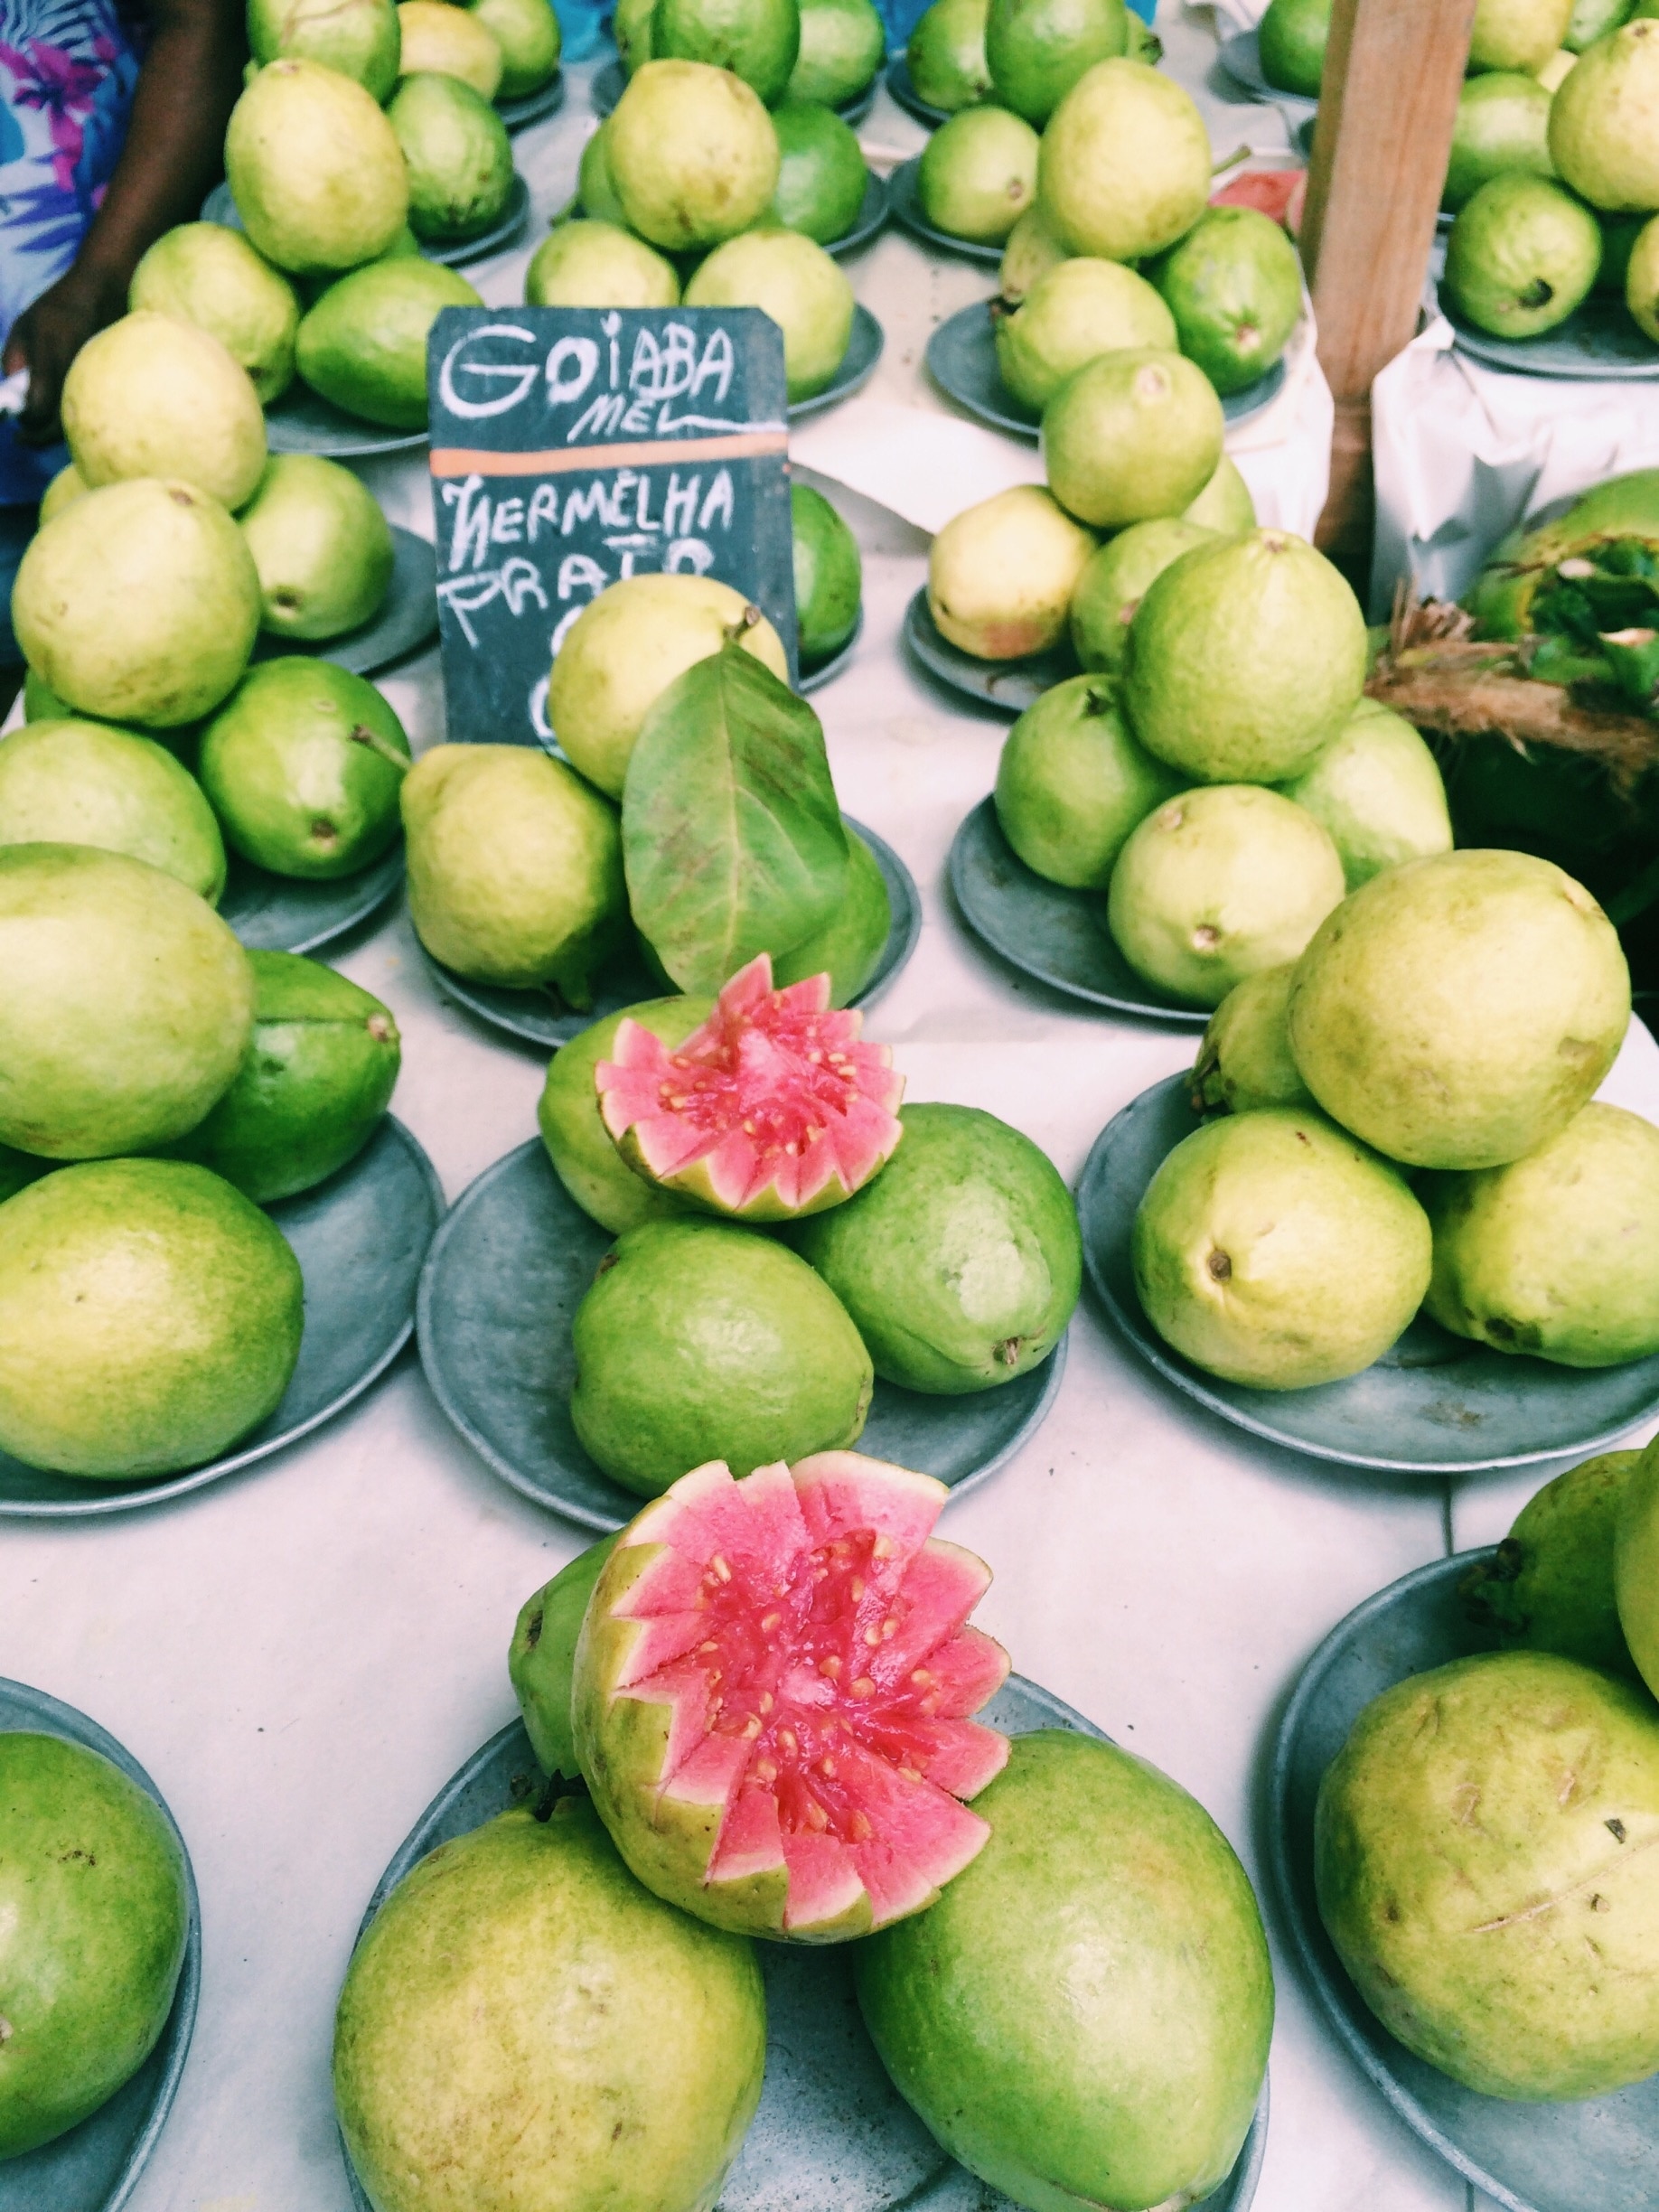 Fresh guava for sale at one of Rio de Janeiros Feira Livre or Fruit Market in Ipanema. The fruit market happens everyday in a different location, this one is in Ipanema. 